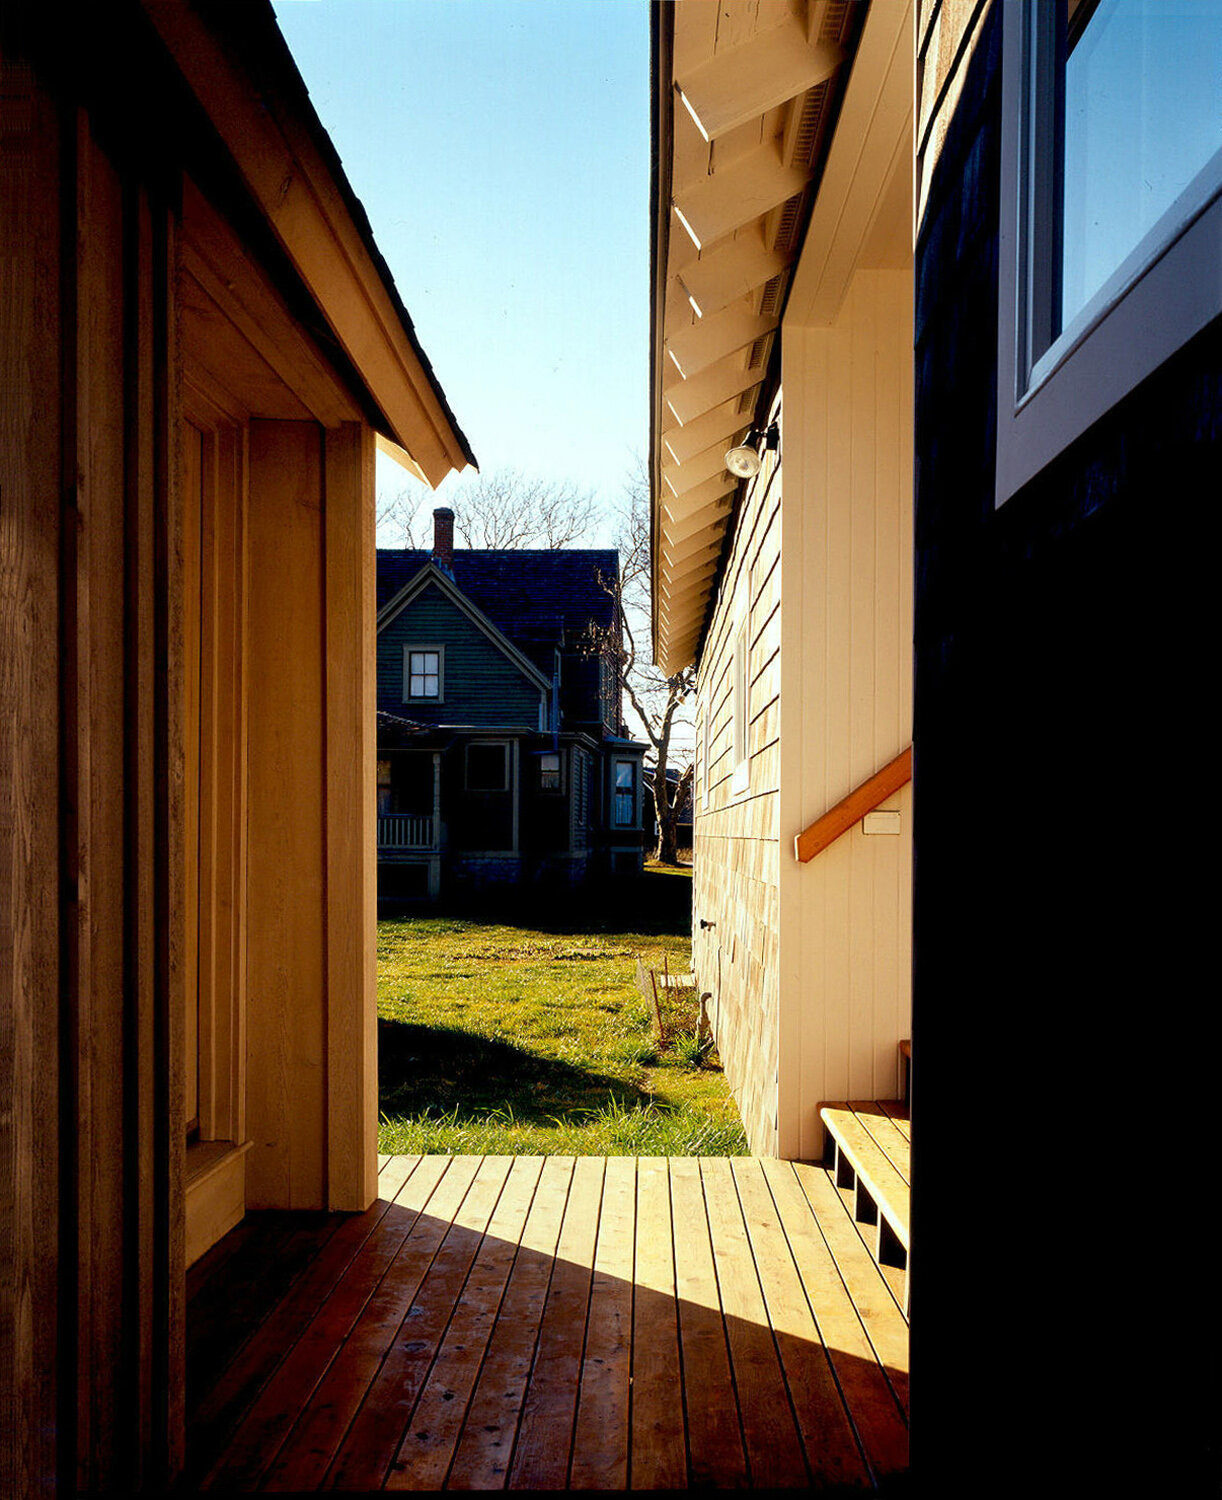  Semi enclosed deck interlocks the Barn Room to the yard and the main house. 